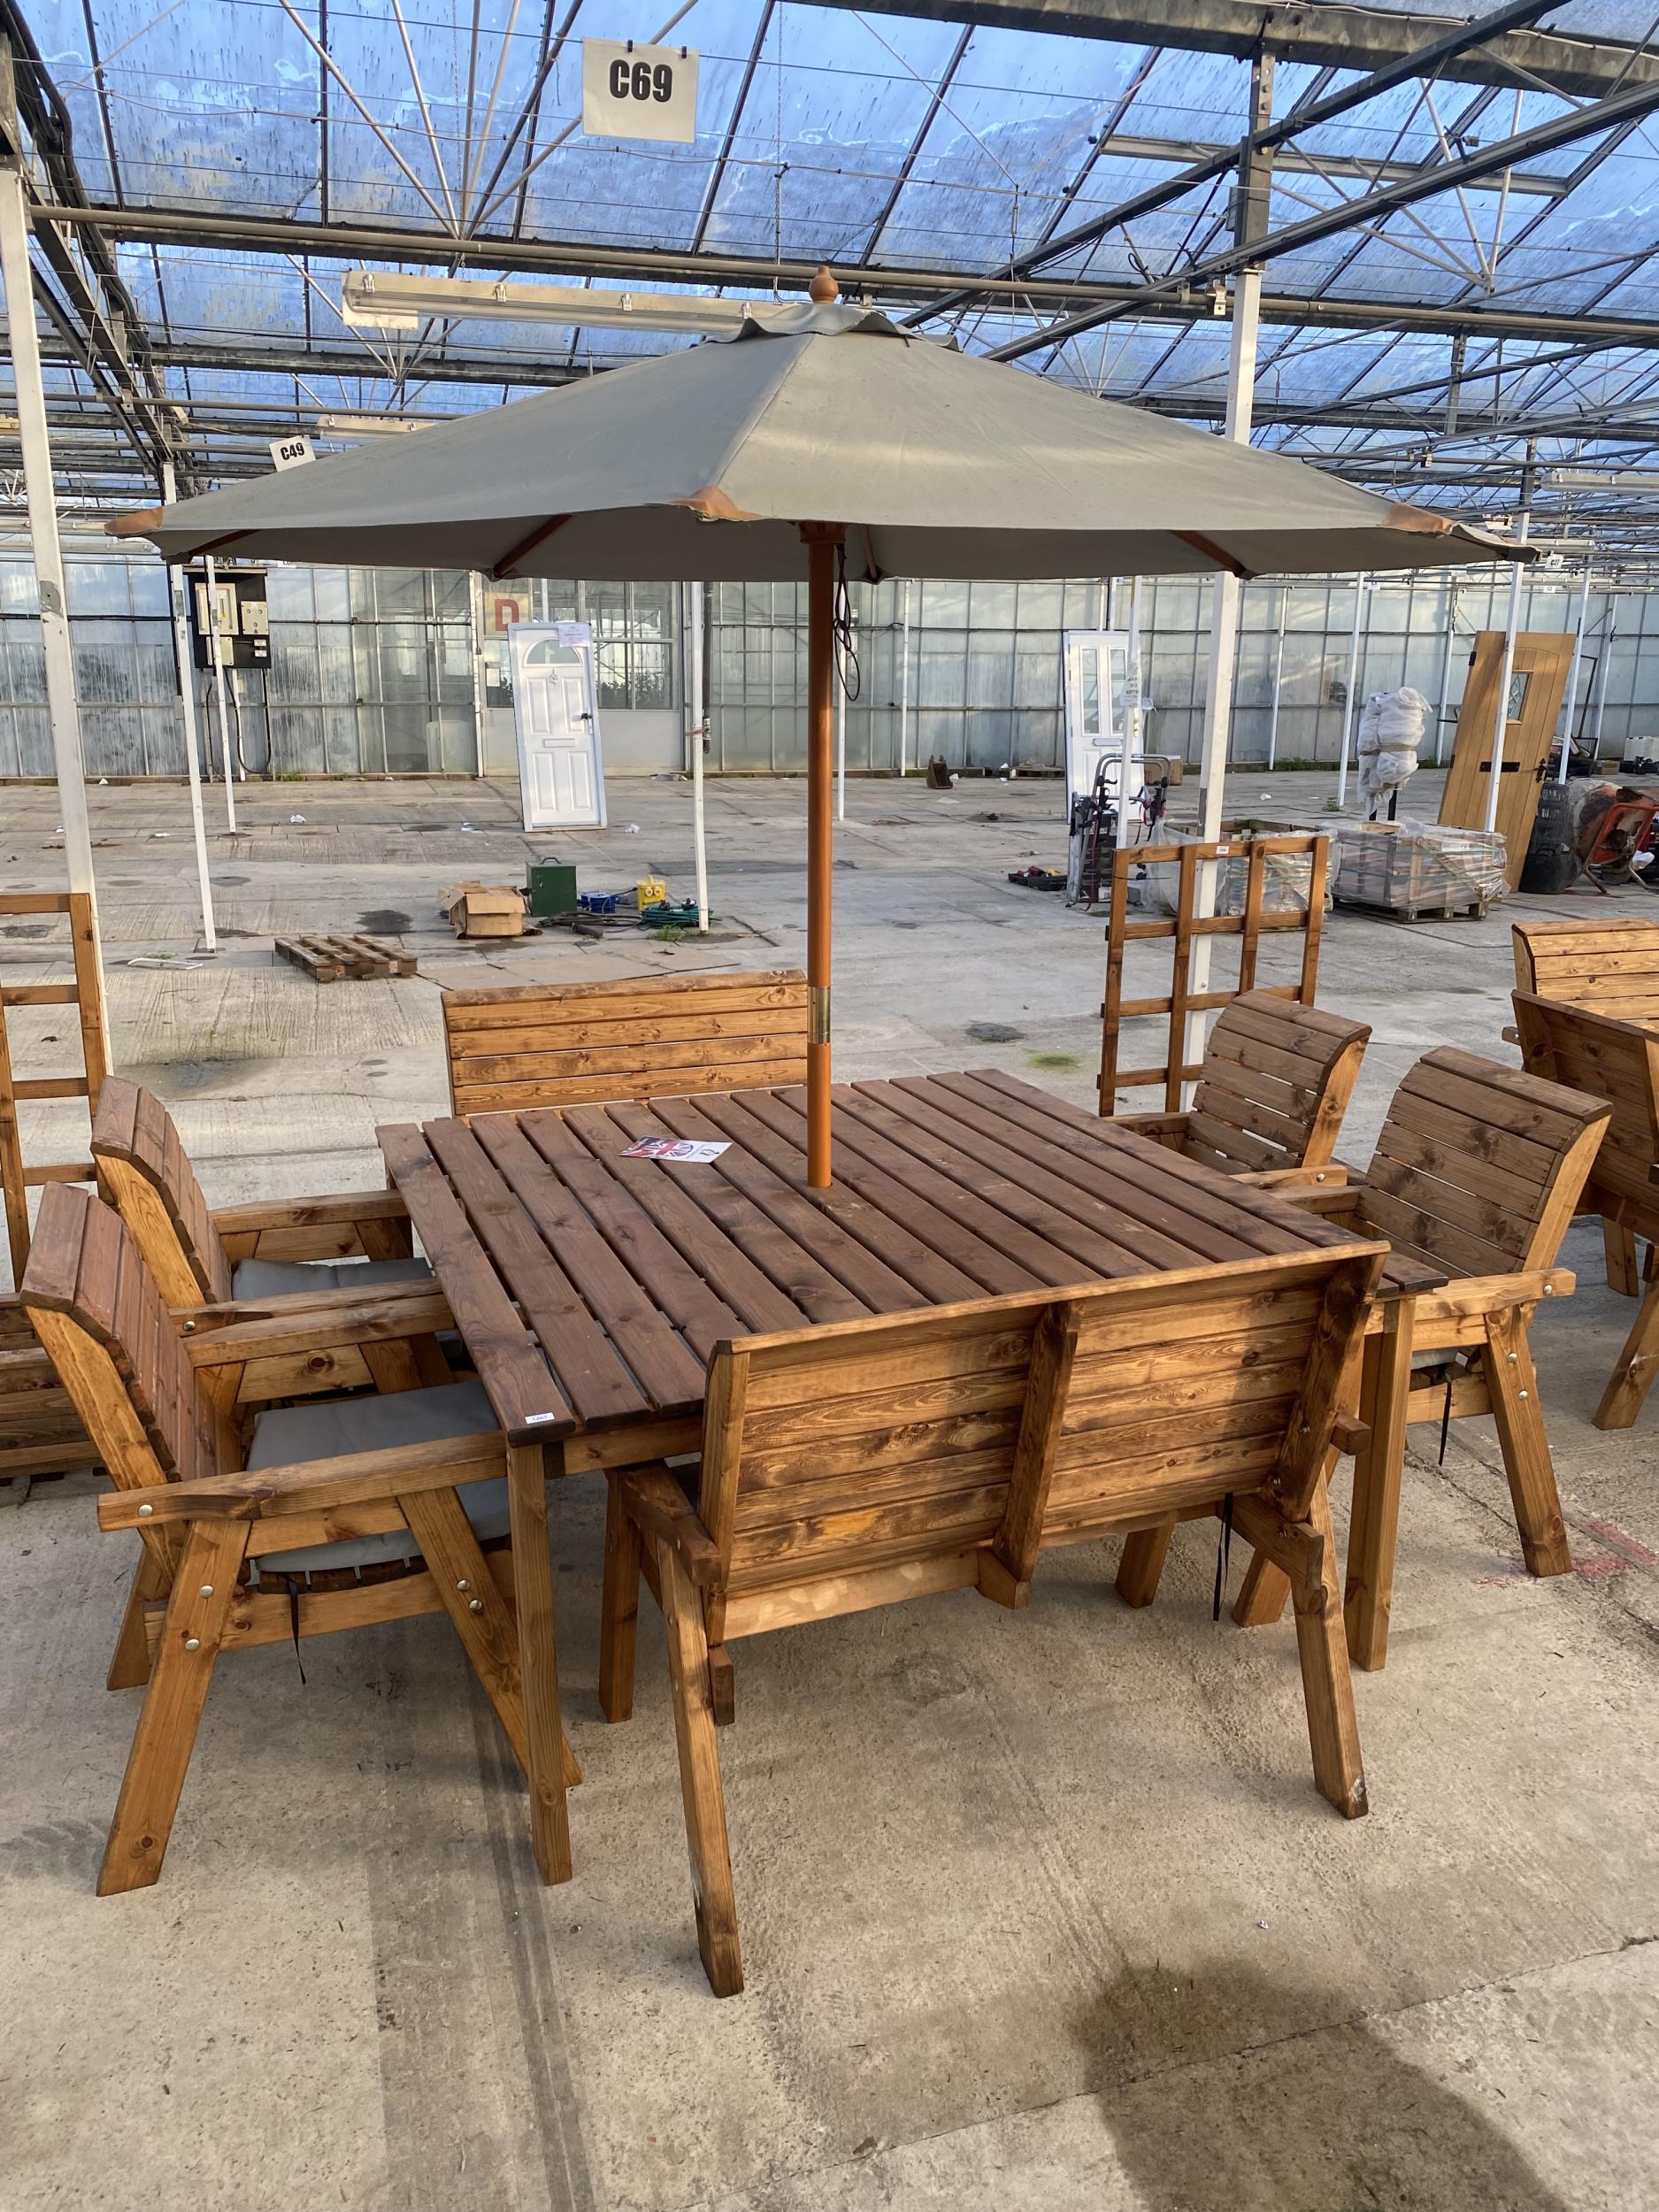 AN AS NEW EX DISPLAY CHARLES TAYLOR PATIO FURNITURE SET COMPRISING OF A LARGE SQUARE TABLE, FOUR